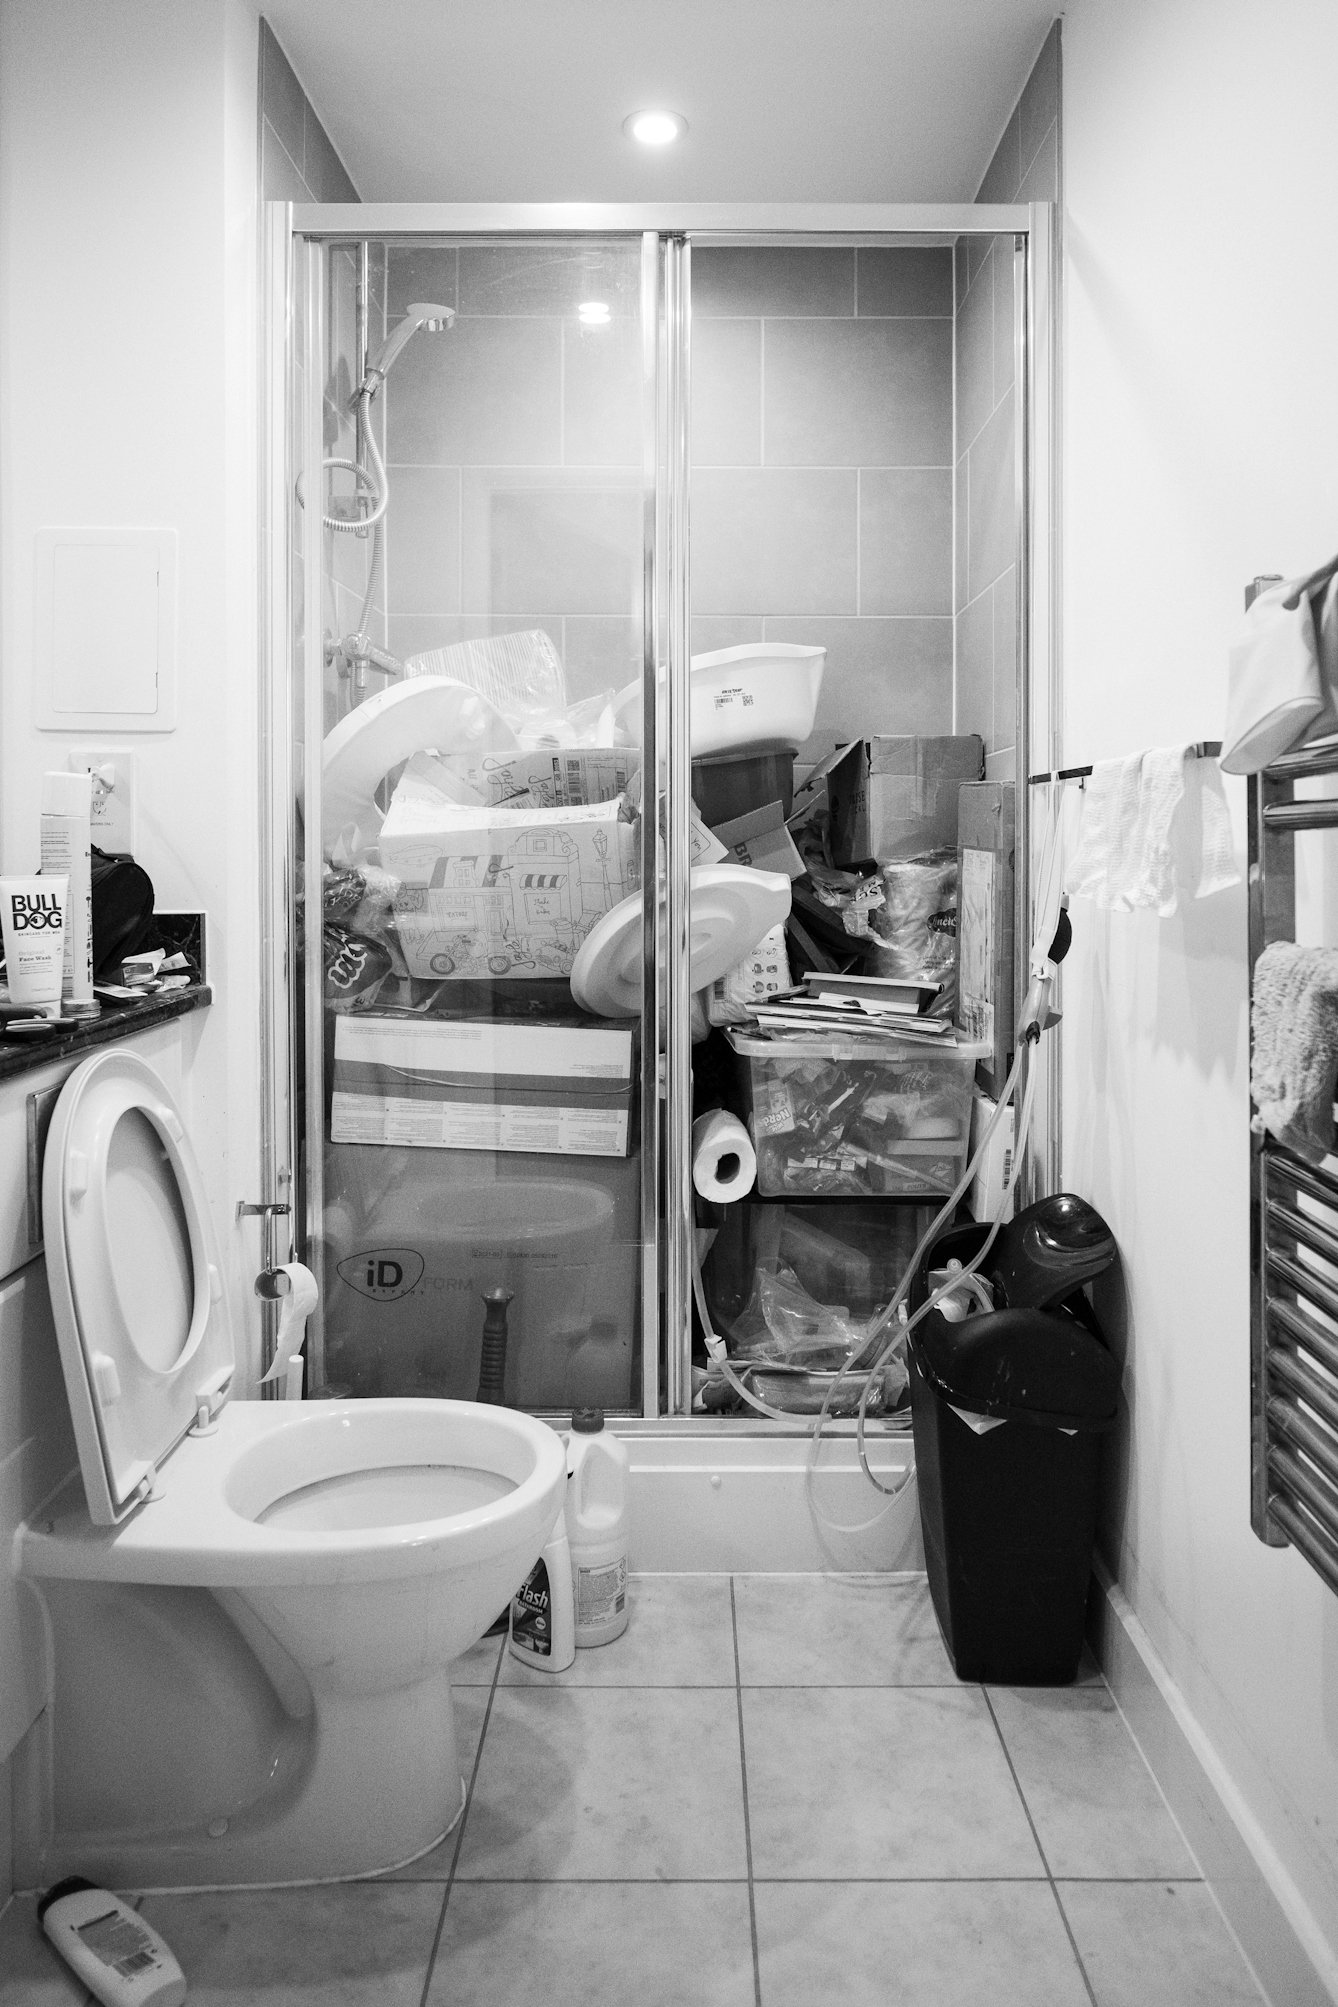 Black and white photograph of a bathroom shower cubicle which is full of objects and being used as a storage area rather than a shower.